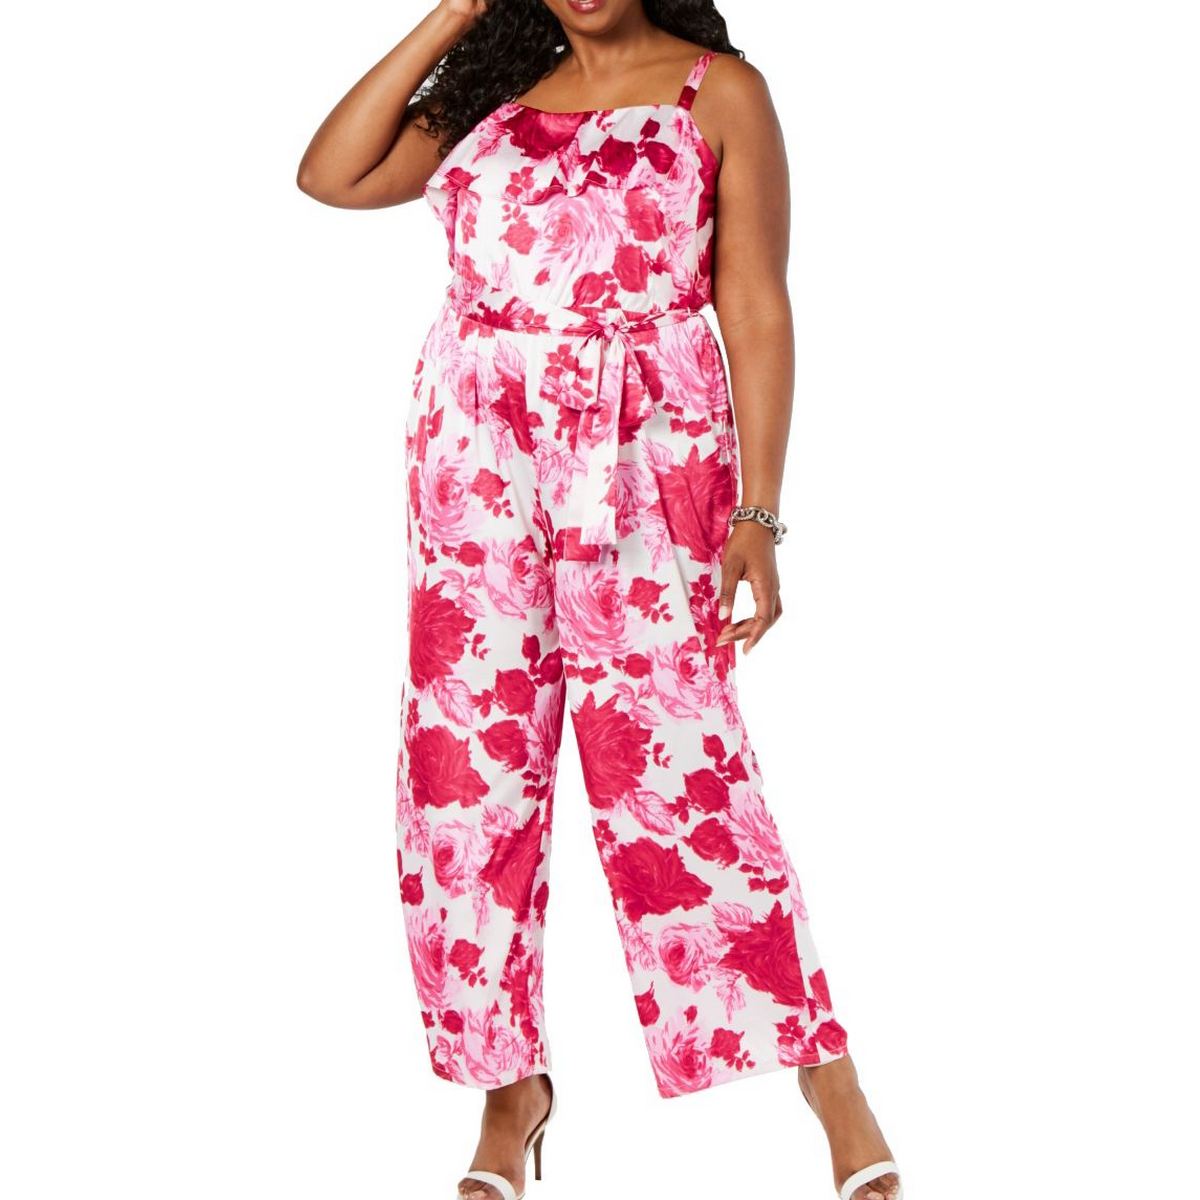 pink overalls plus size